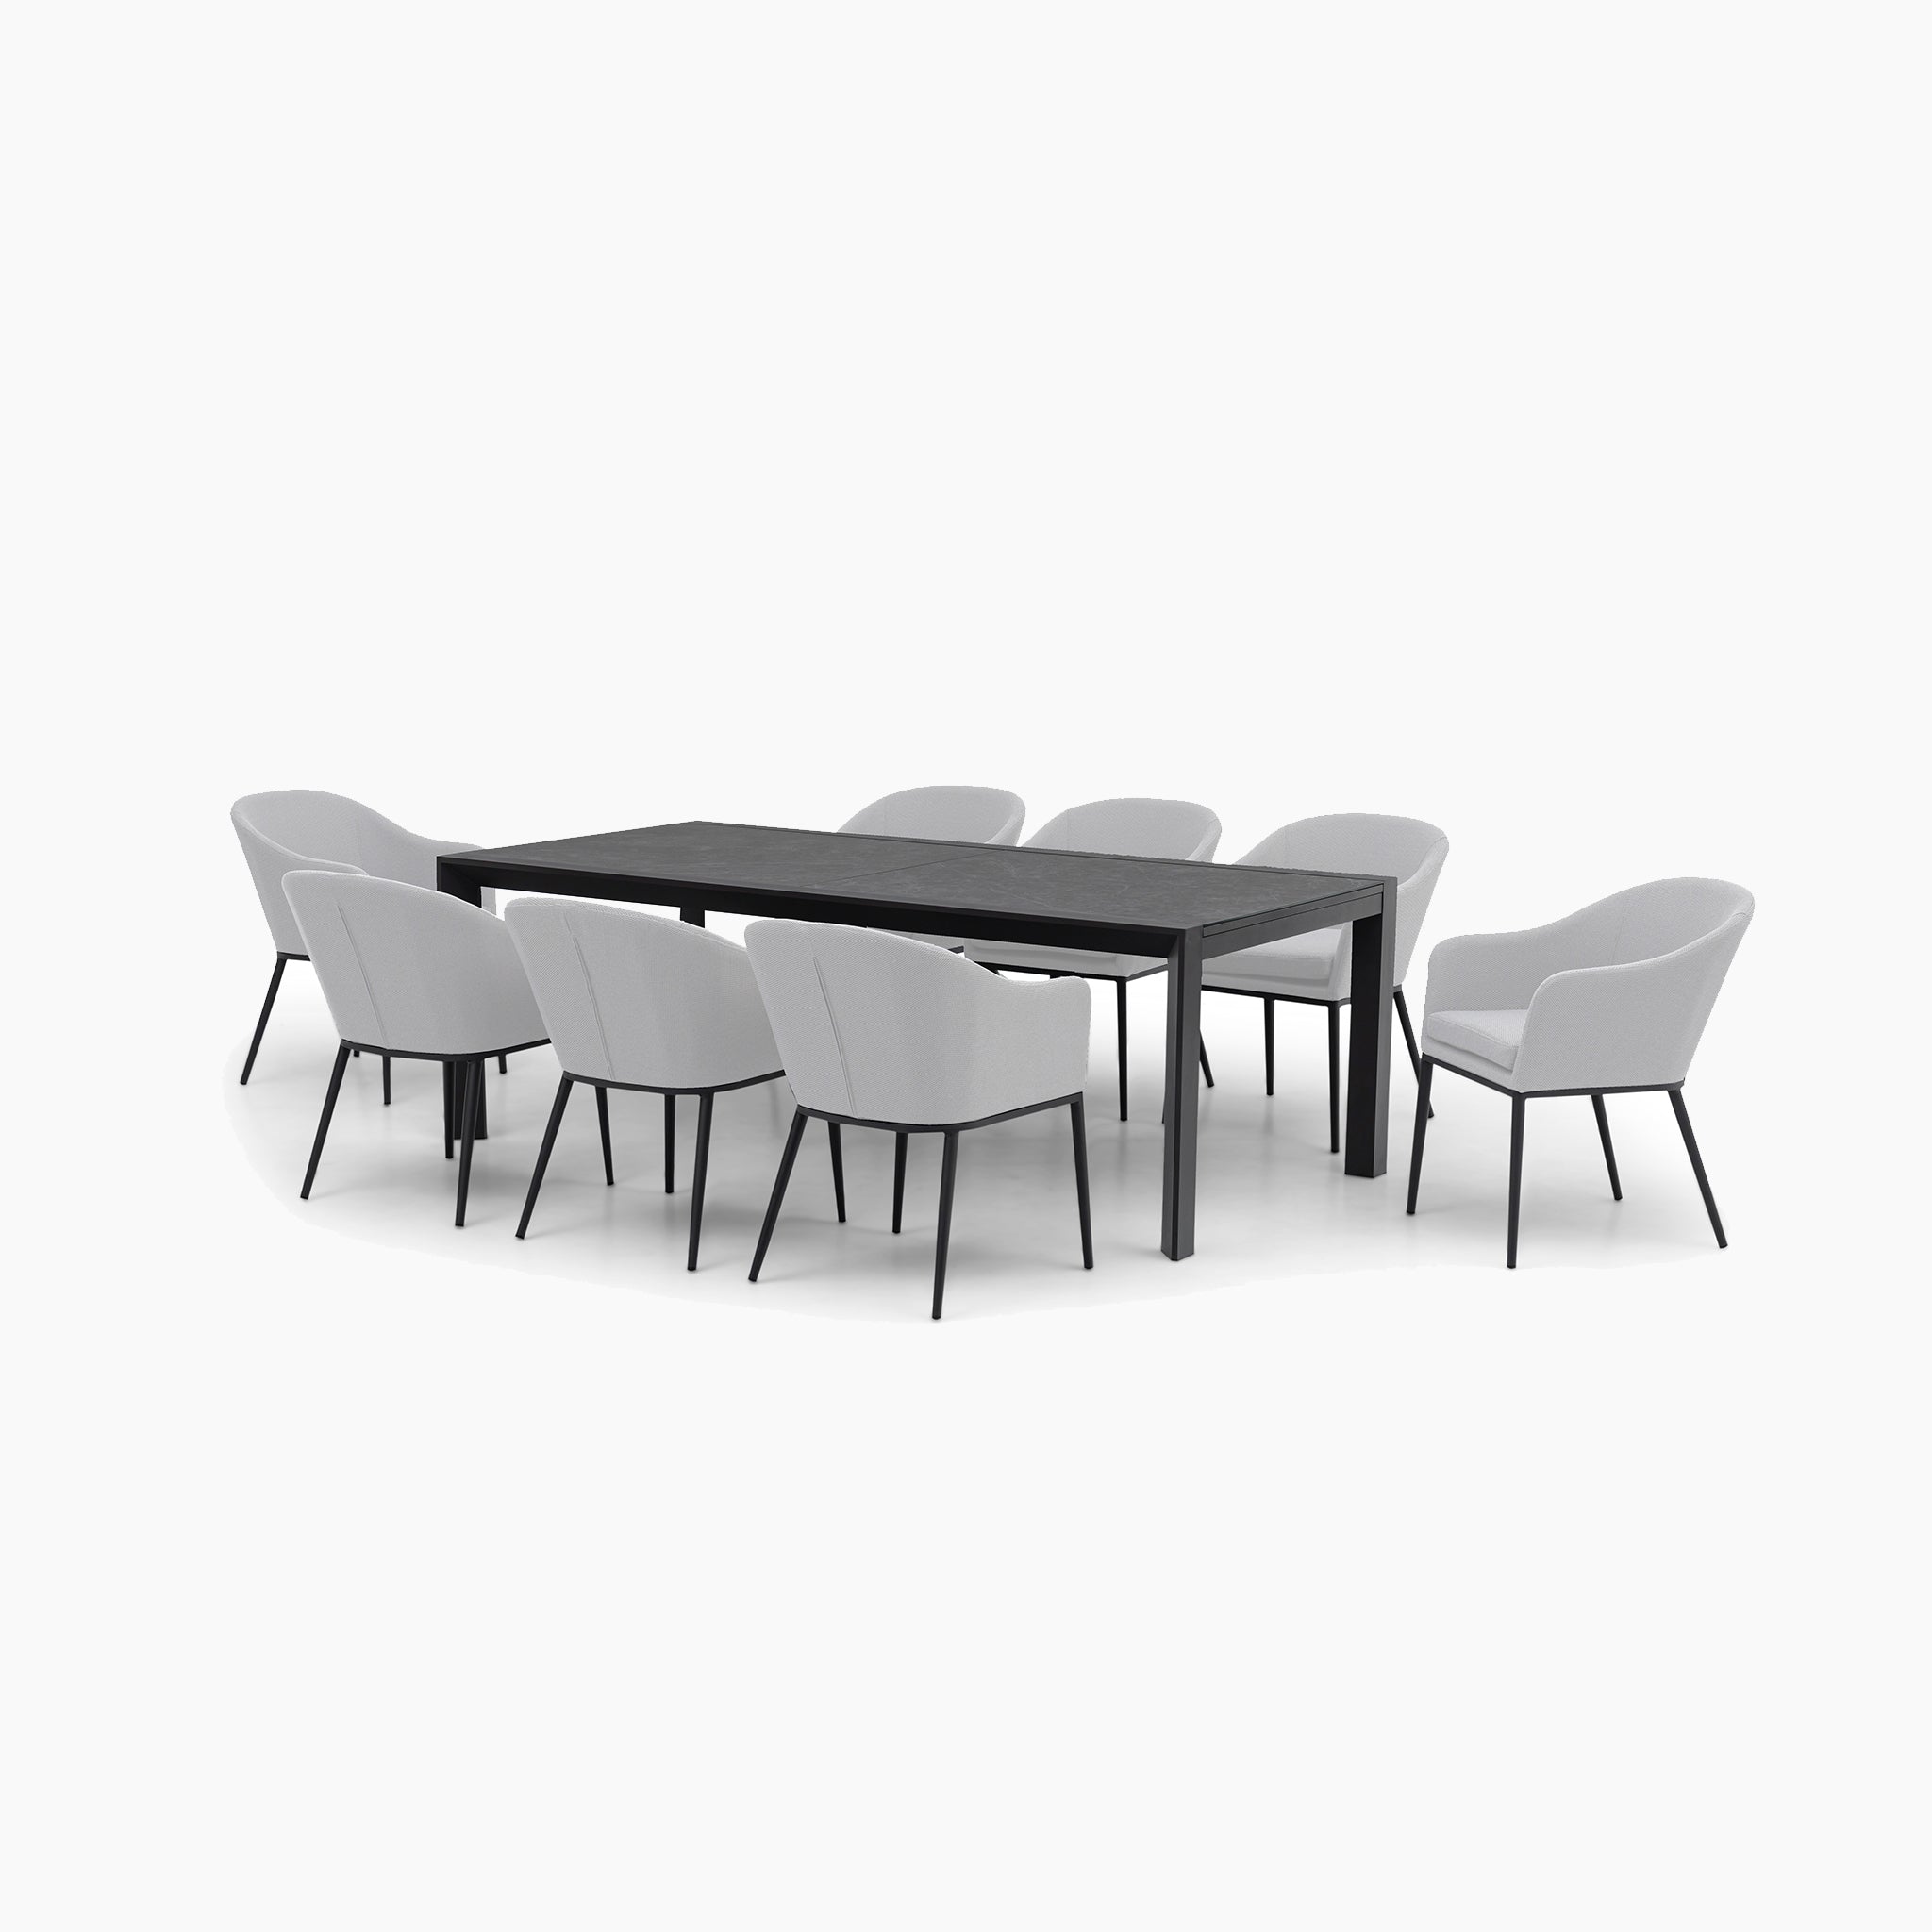 Luna 8 Seat Outdoor Fabric Extending Ceramic Dining Set in Oyster Grey